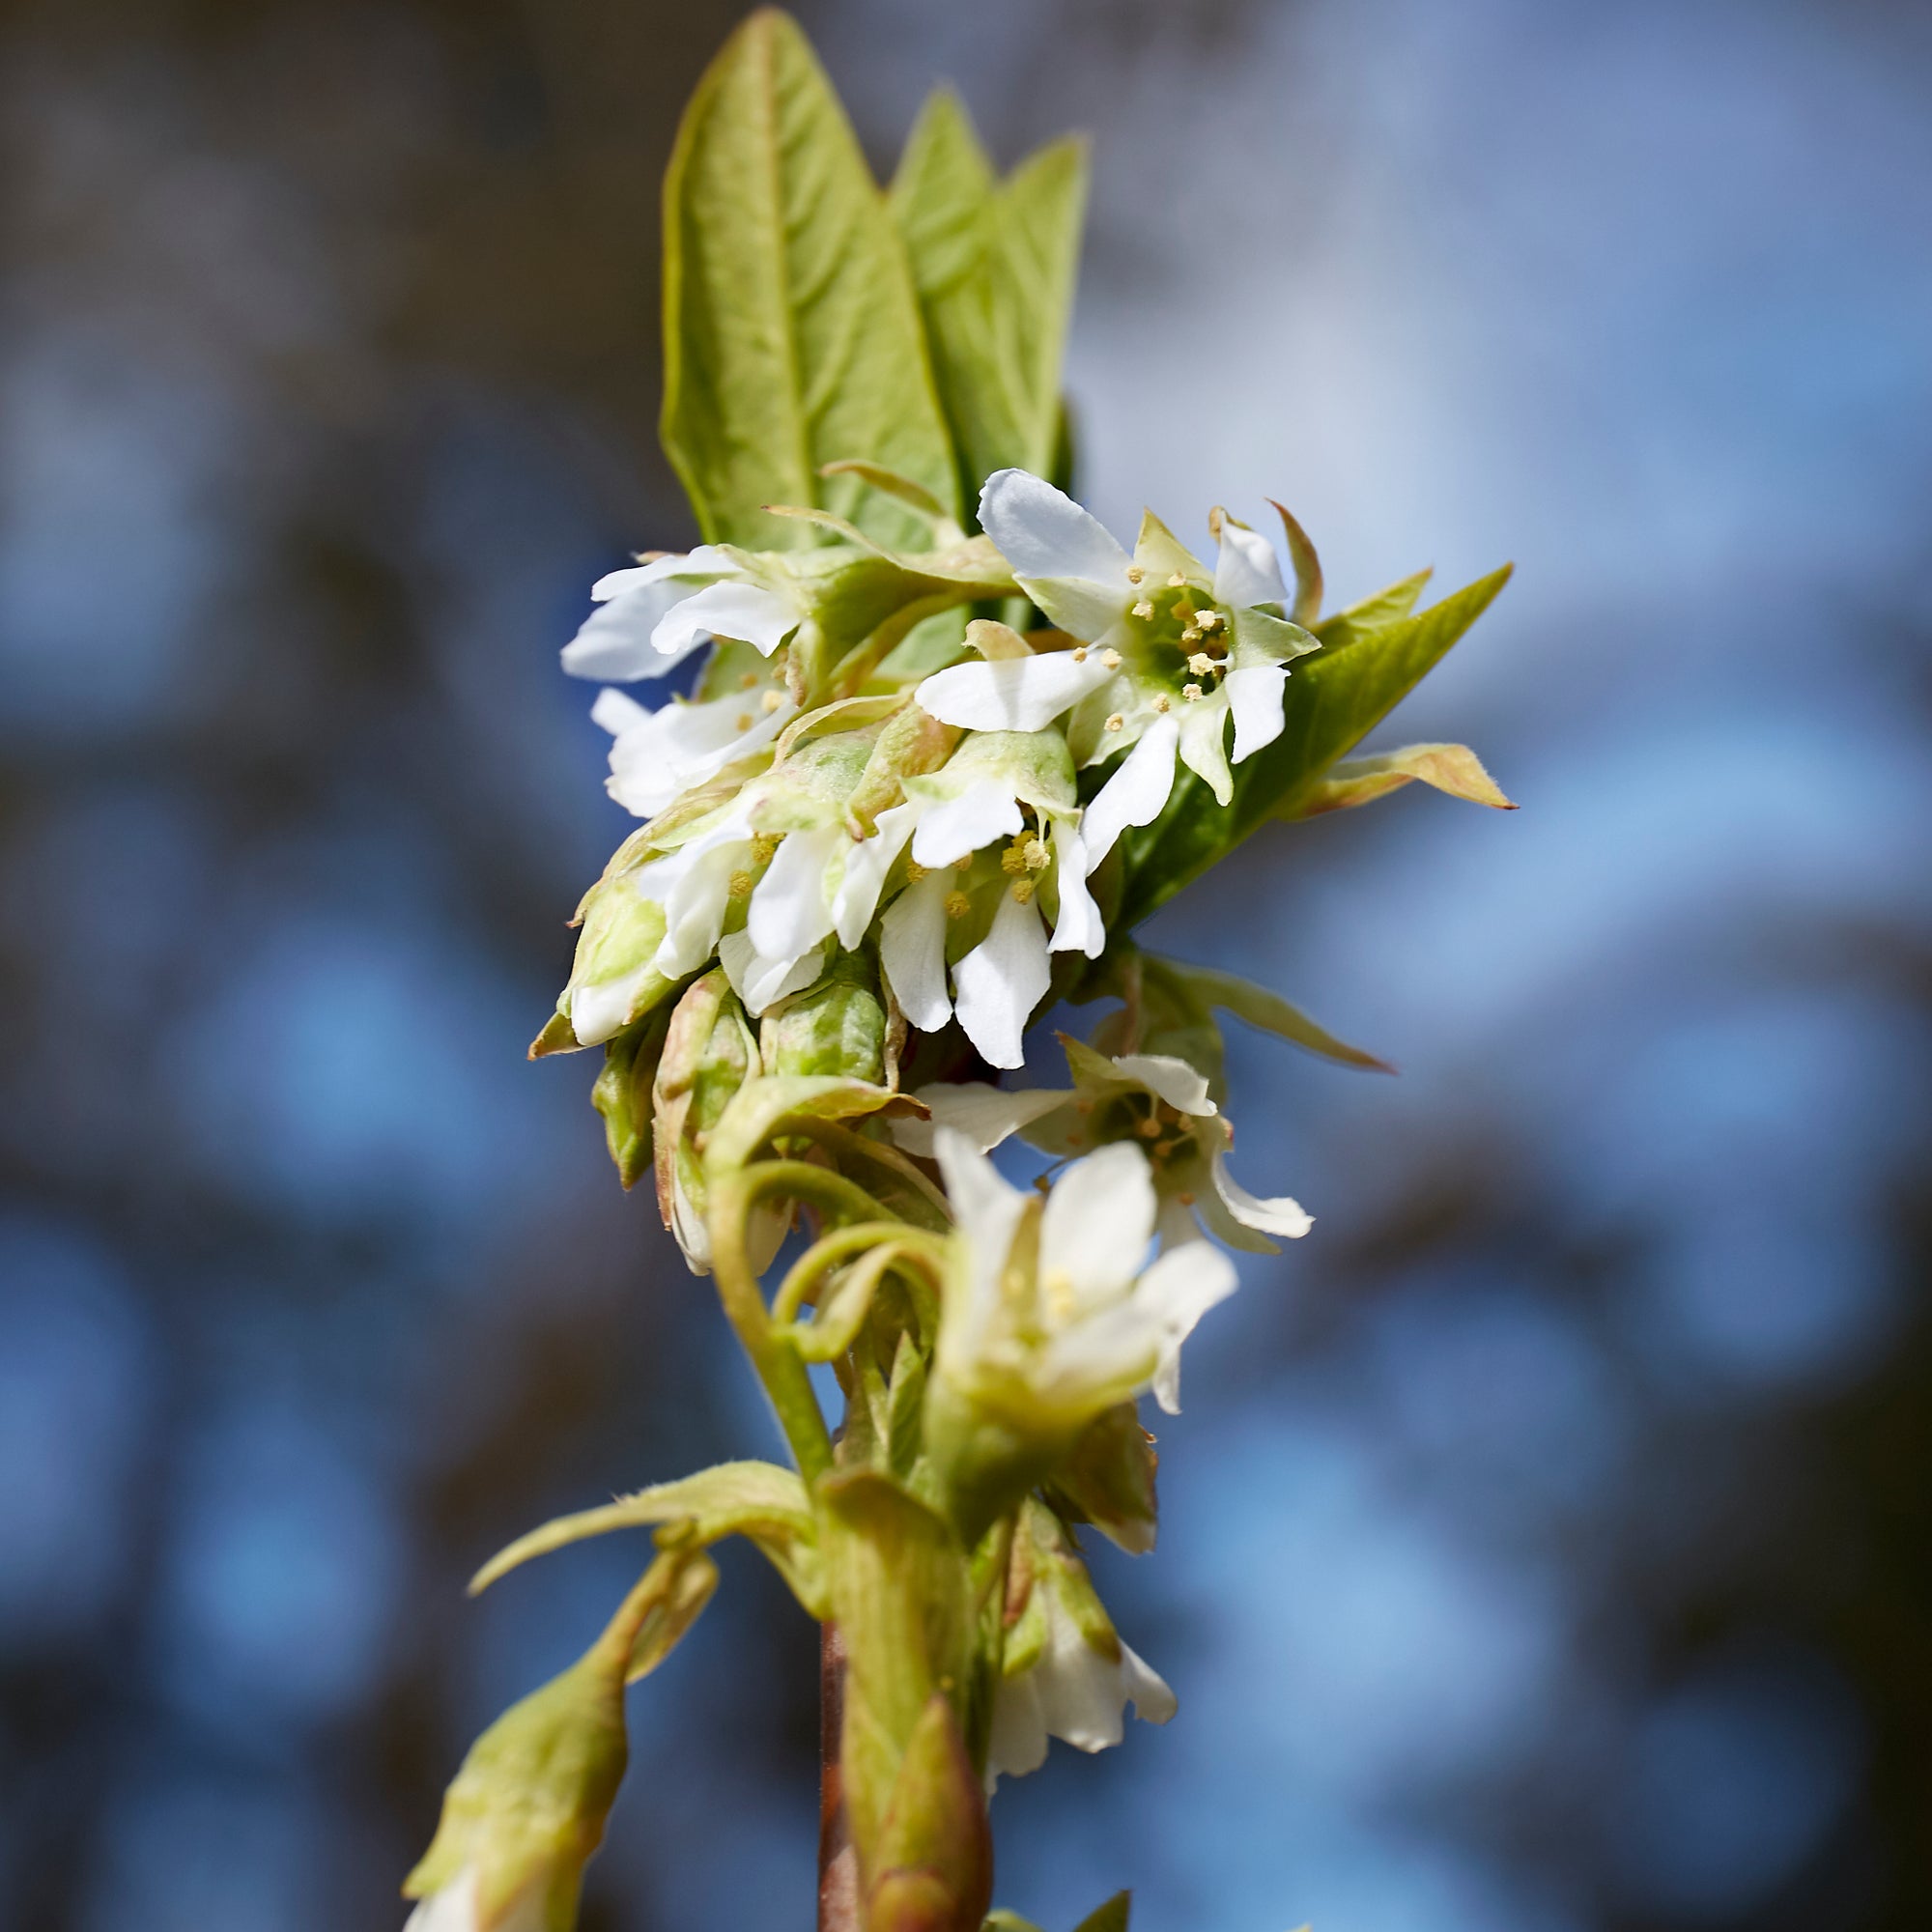 A cluster of white blooming flowers, buds, and green leaves.